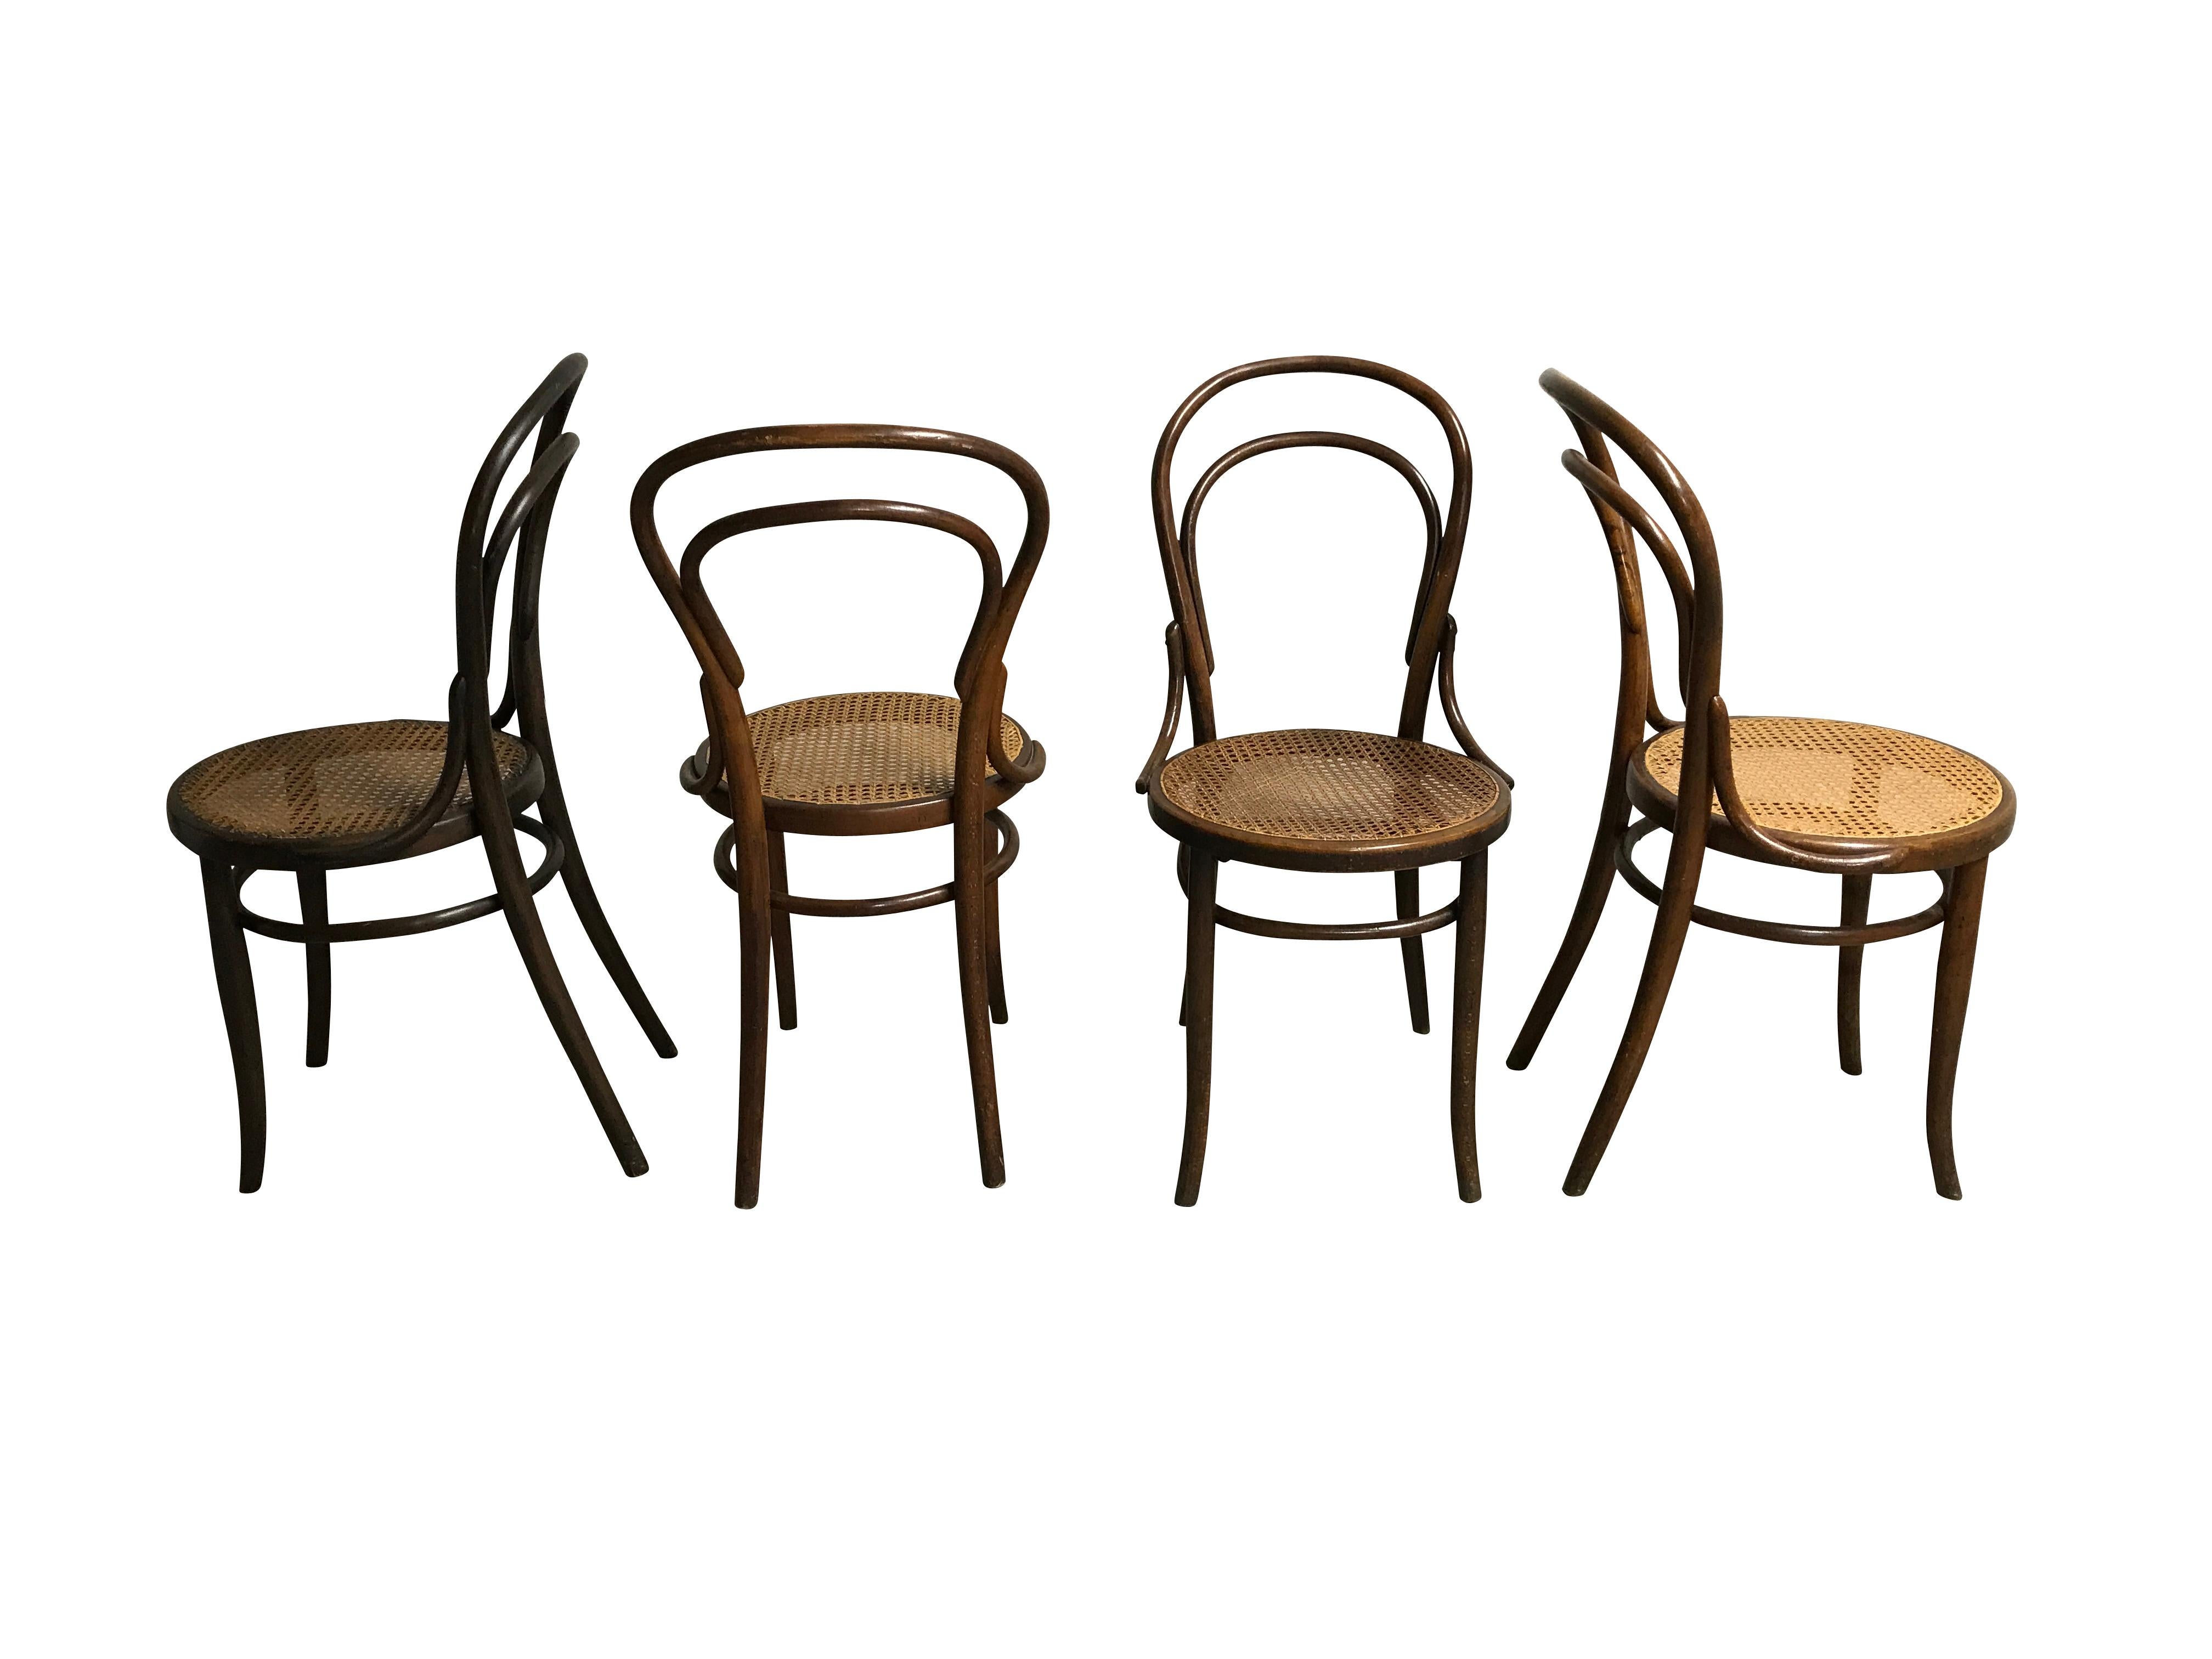 Set of 4 dark brown Thonet no. 14 dining chairs.

The cane seats are in good condition.

Labeled with the Kohn brother stickers.

1920s - Austria

Dimensions:

Width 43 cm/16.9 inch
Depth 52 cm/20.5 inch
Height 91 cm/35.8 inch
Seat